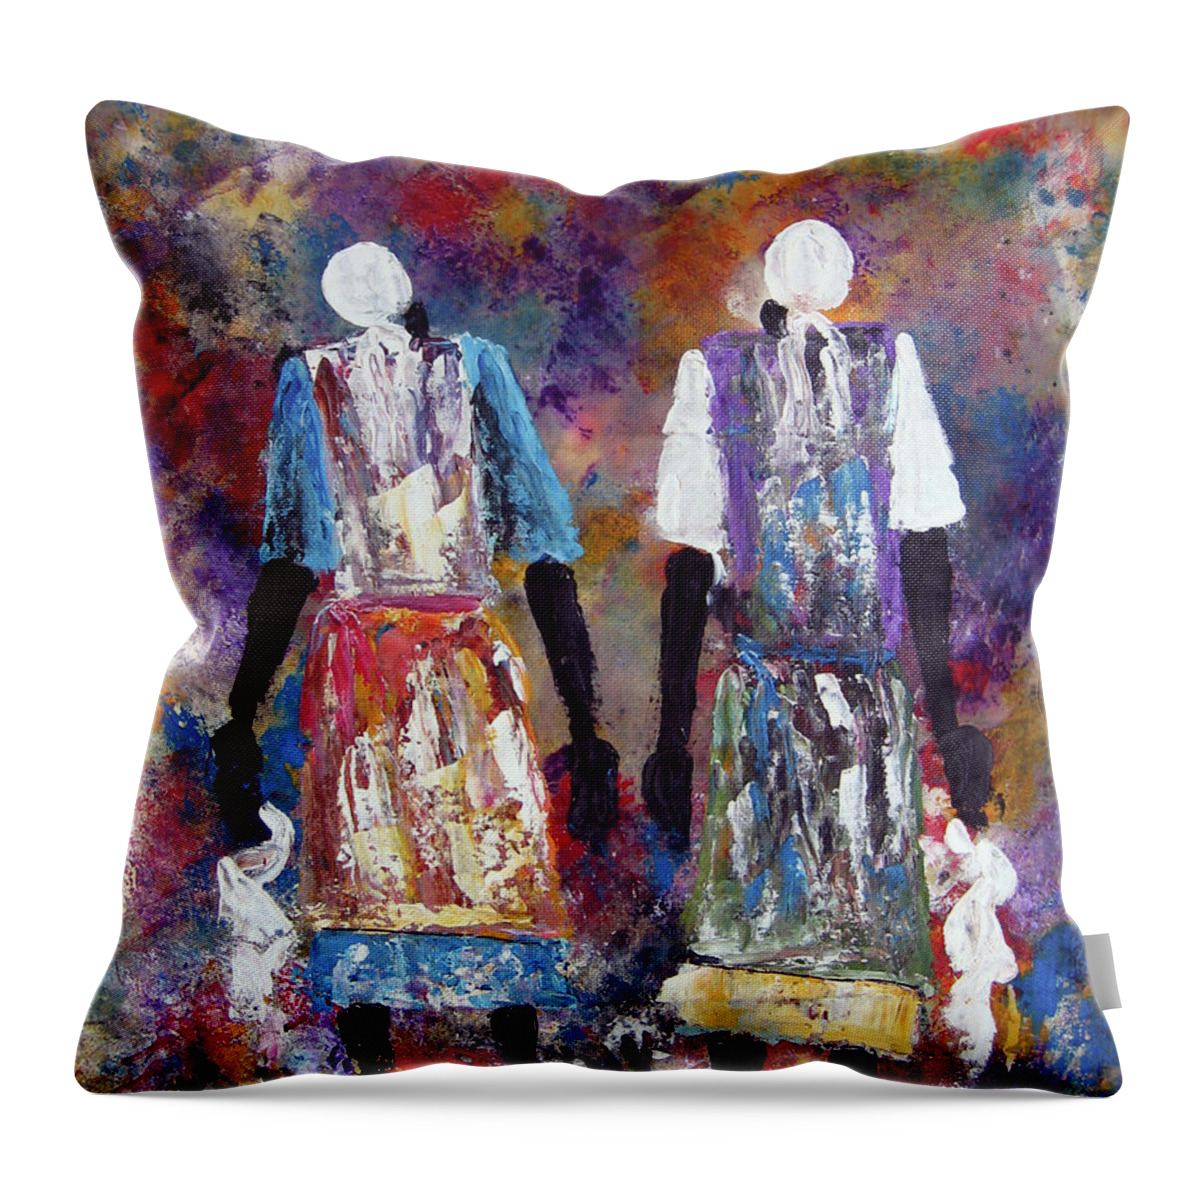  Throw Pillow featuring the painting Woman Of Peace by Peter Sibeko